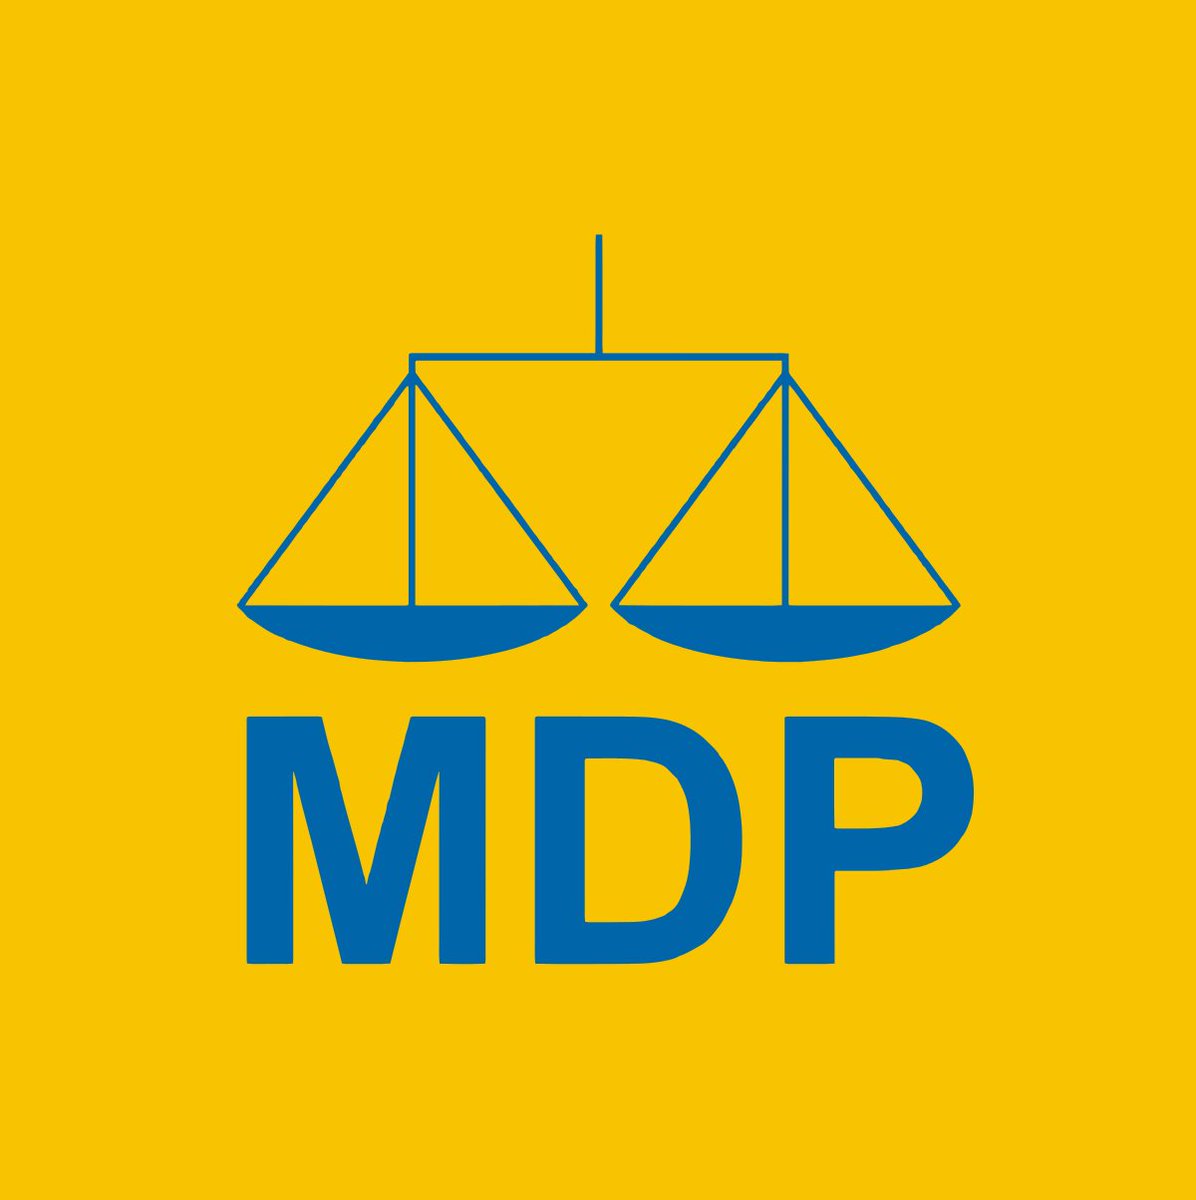 Here's a piece of advice for MDP. The chairperson role should be a full-time, salaried position like Democratic & Republican parties in the US & also in the UK. This position comes with substantial responsibilities like fundraising, strategising & managing national election…